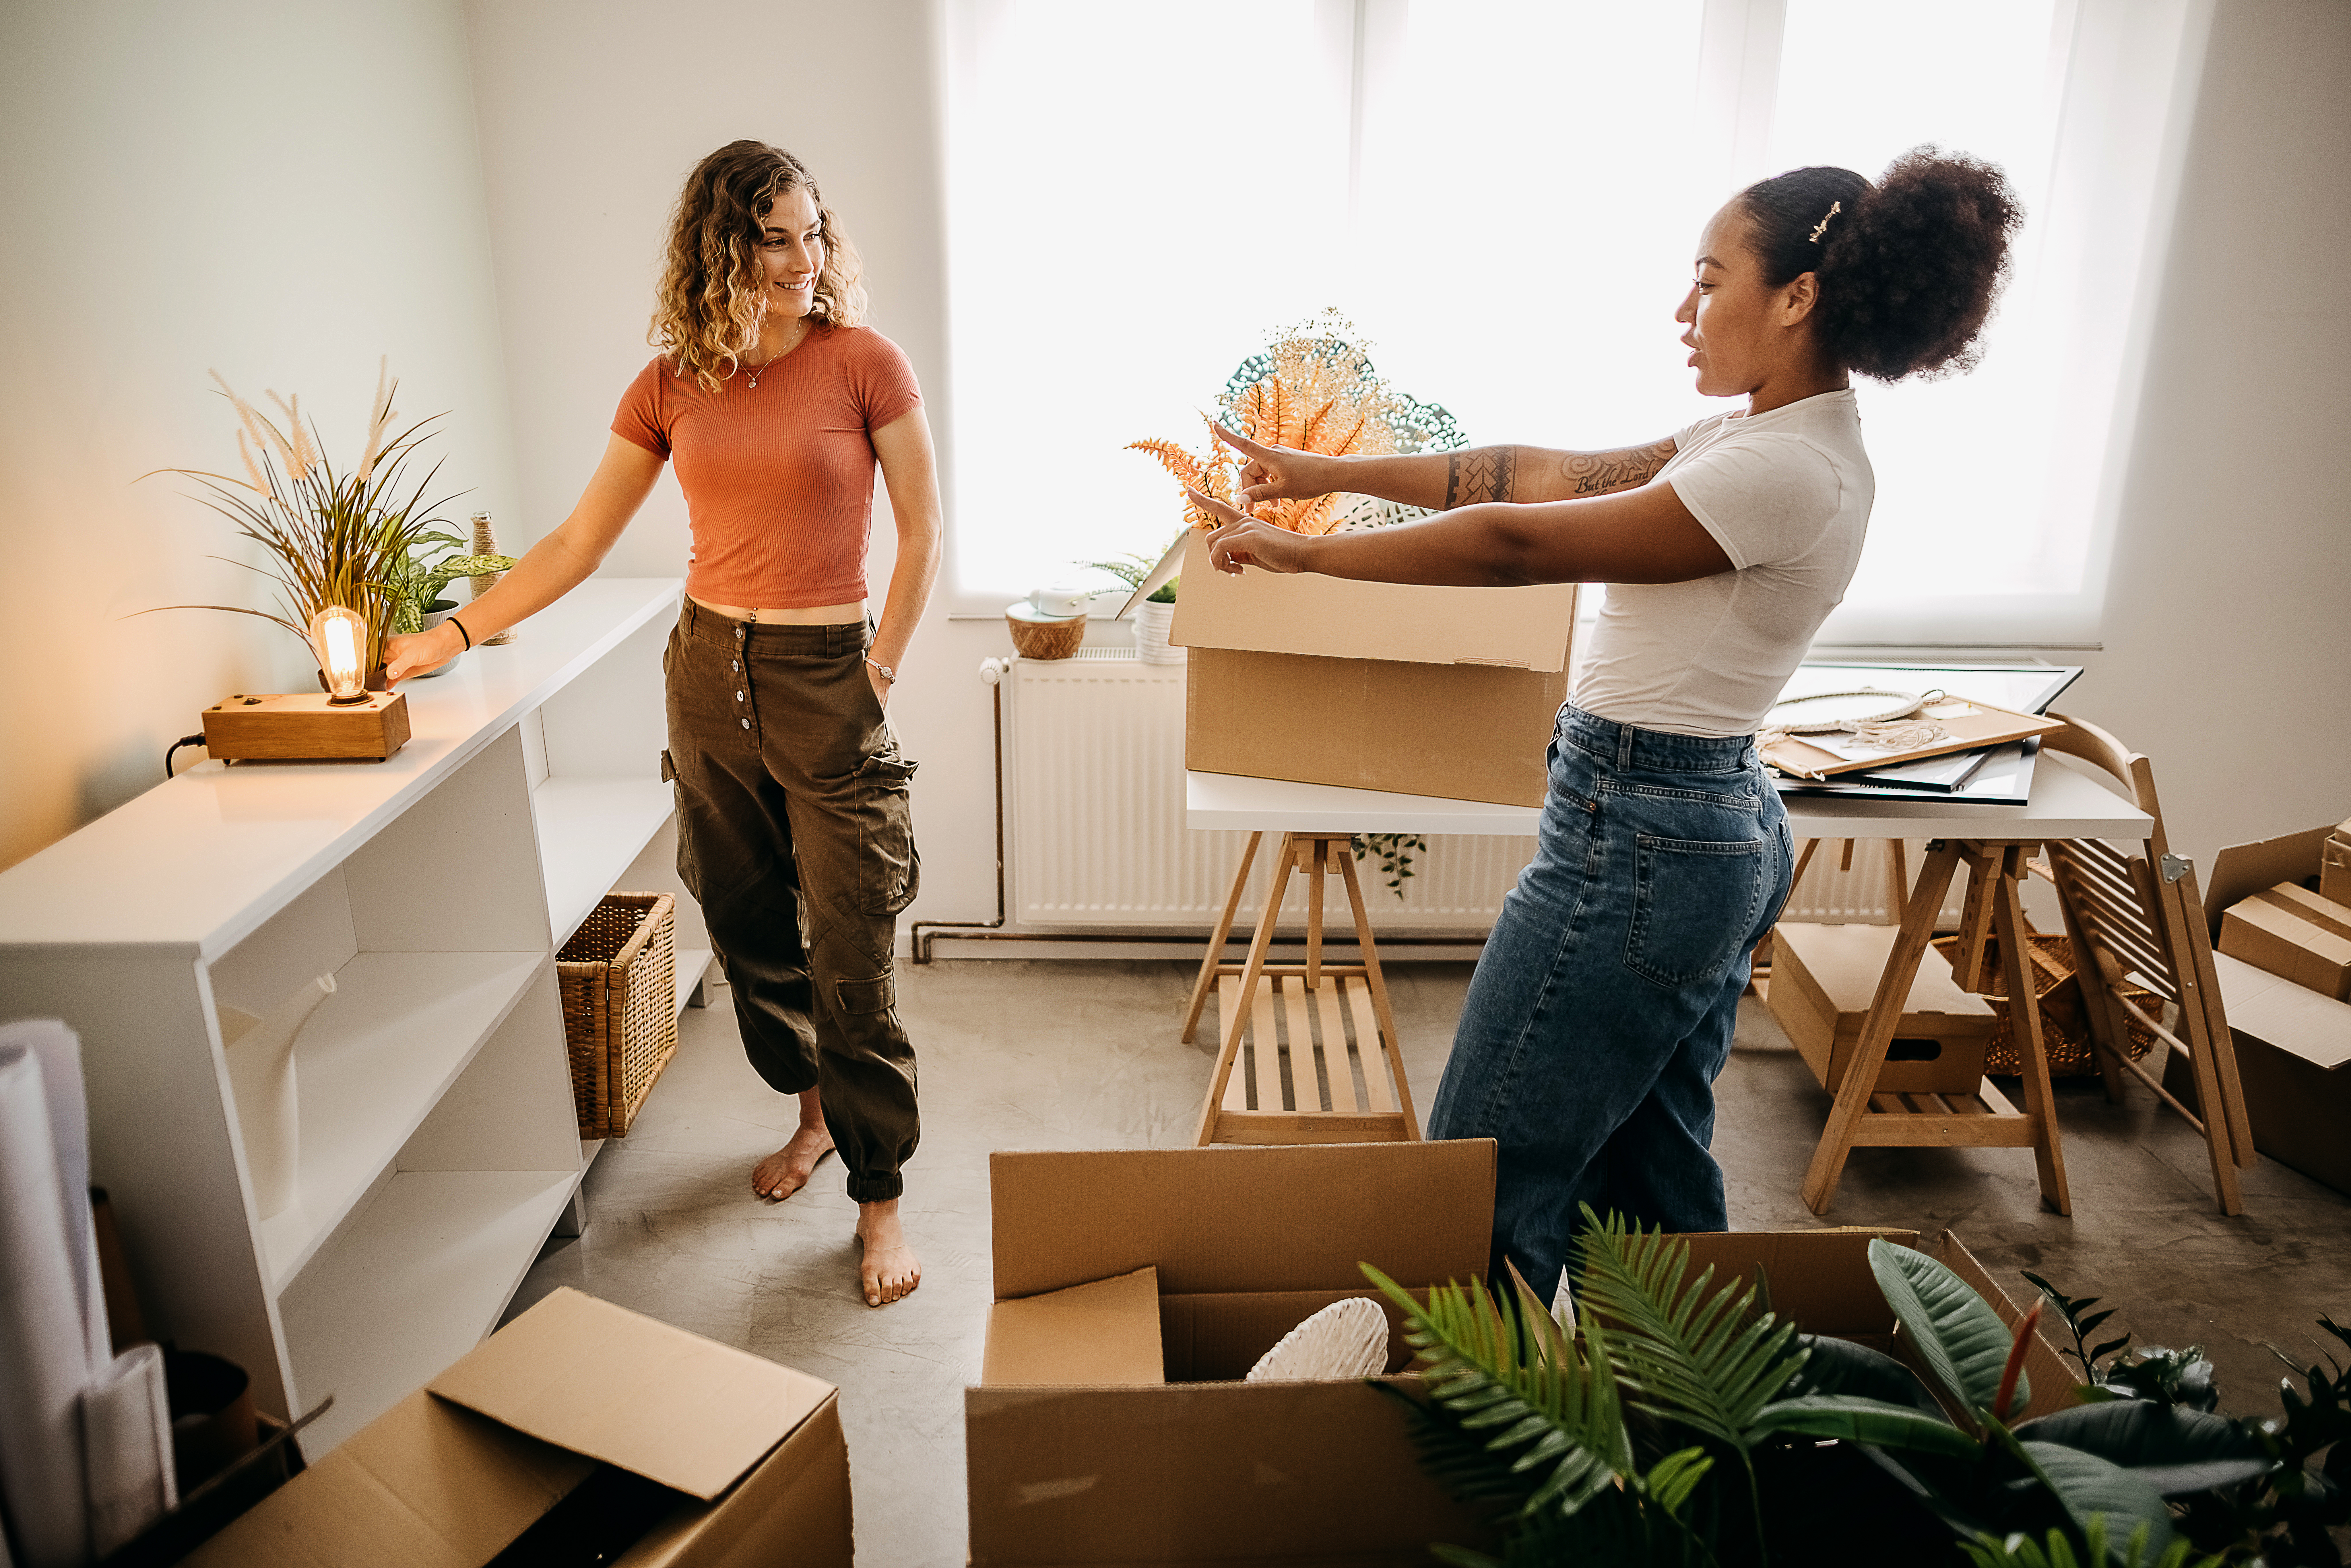 Stay connected during moving season